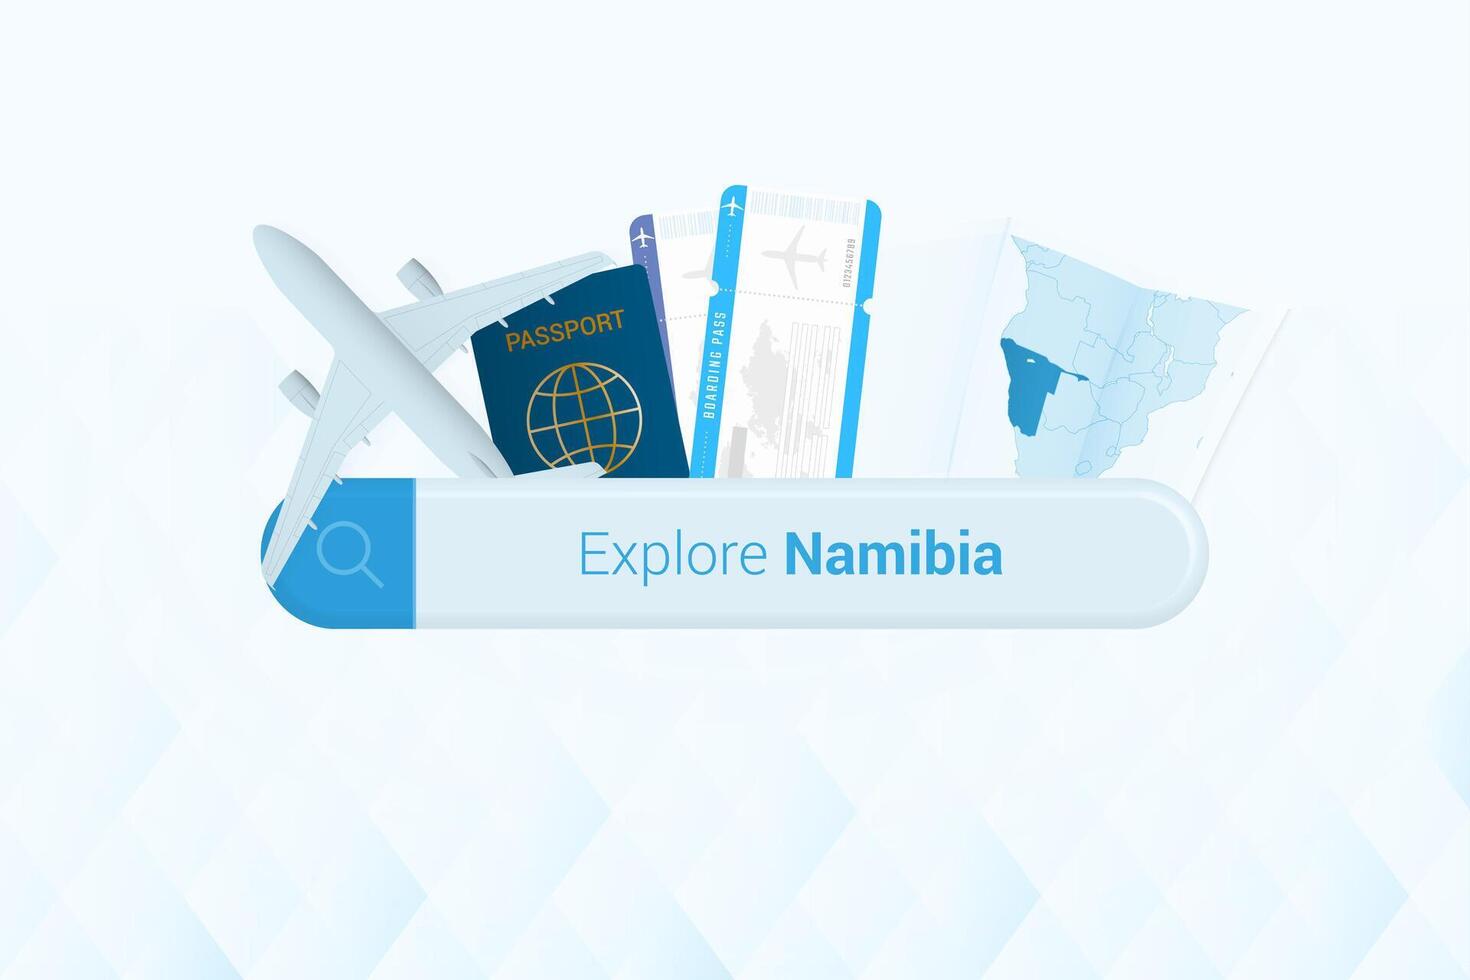 Searching tickets to Namibia or travel destination in Namibia. Searching bar with airplane, passport, boarding pass, tickets and map. vector